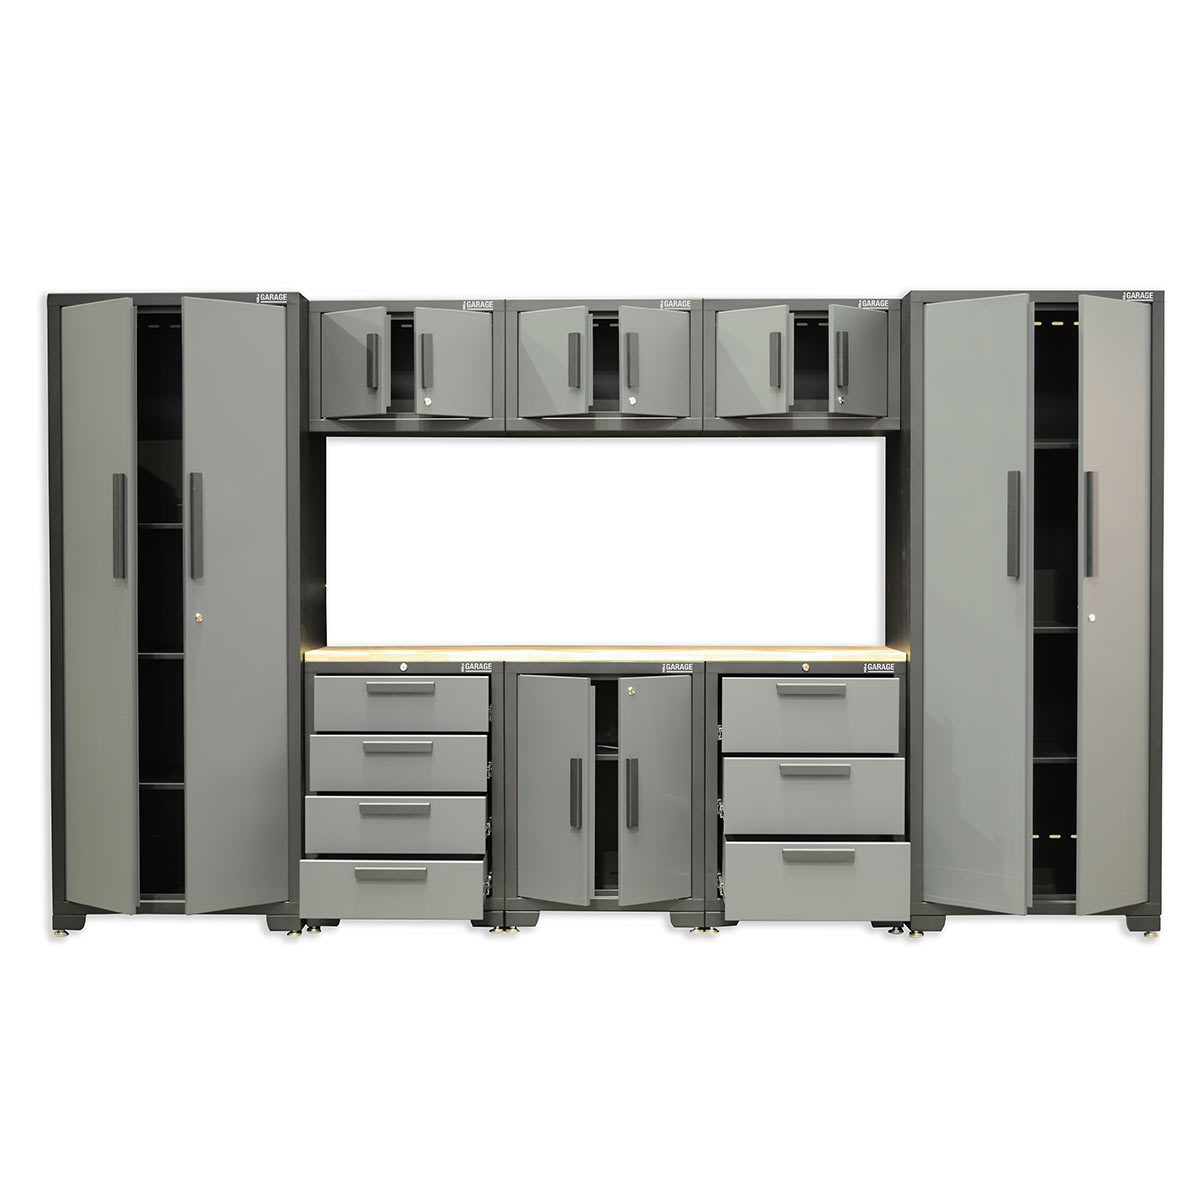 Tool storage cabinets with open draws and doors on white background